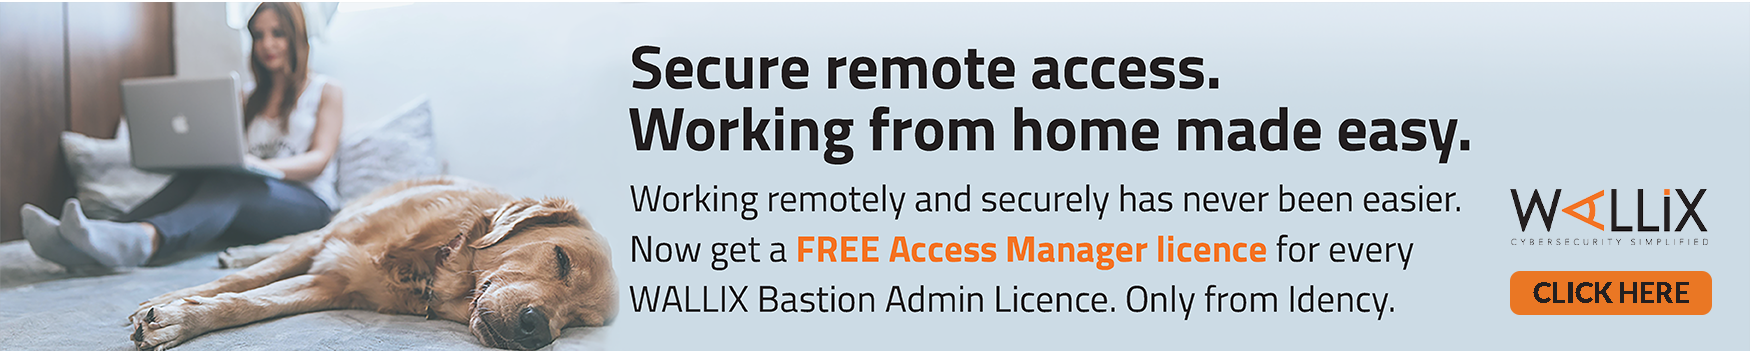 WALLIX remote access offer banner